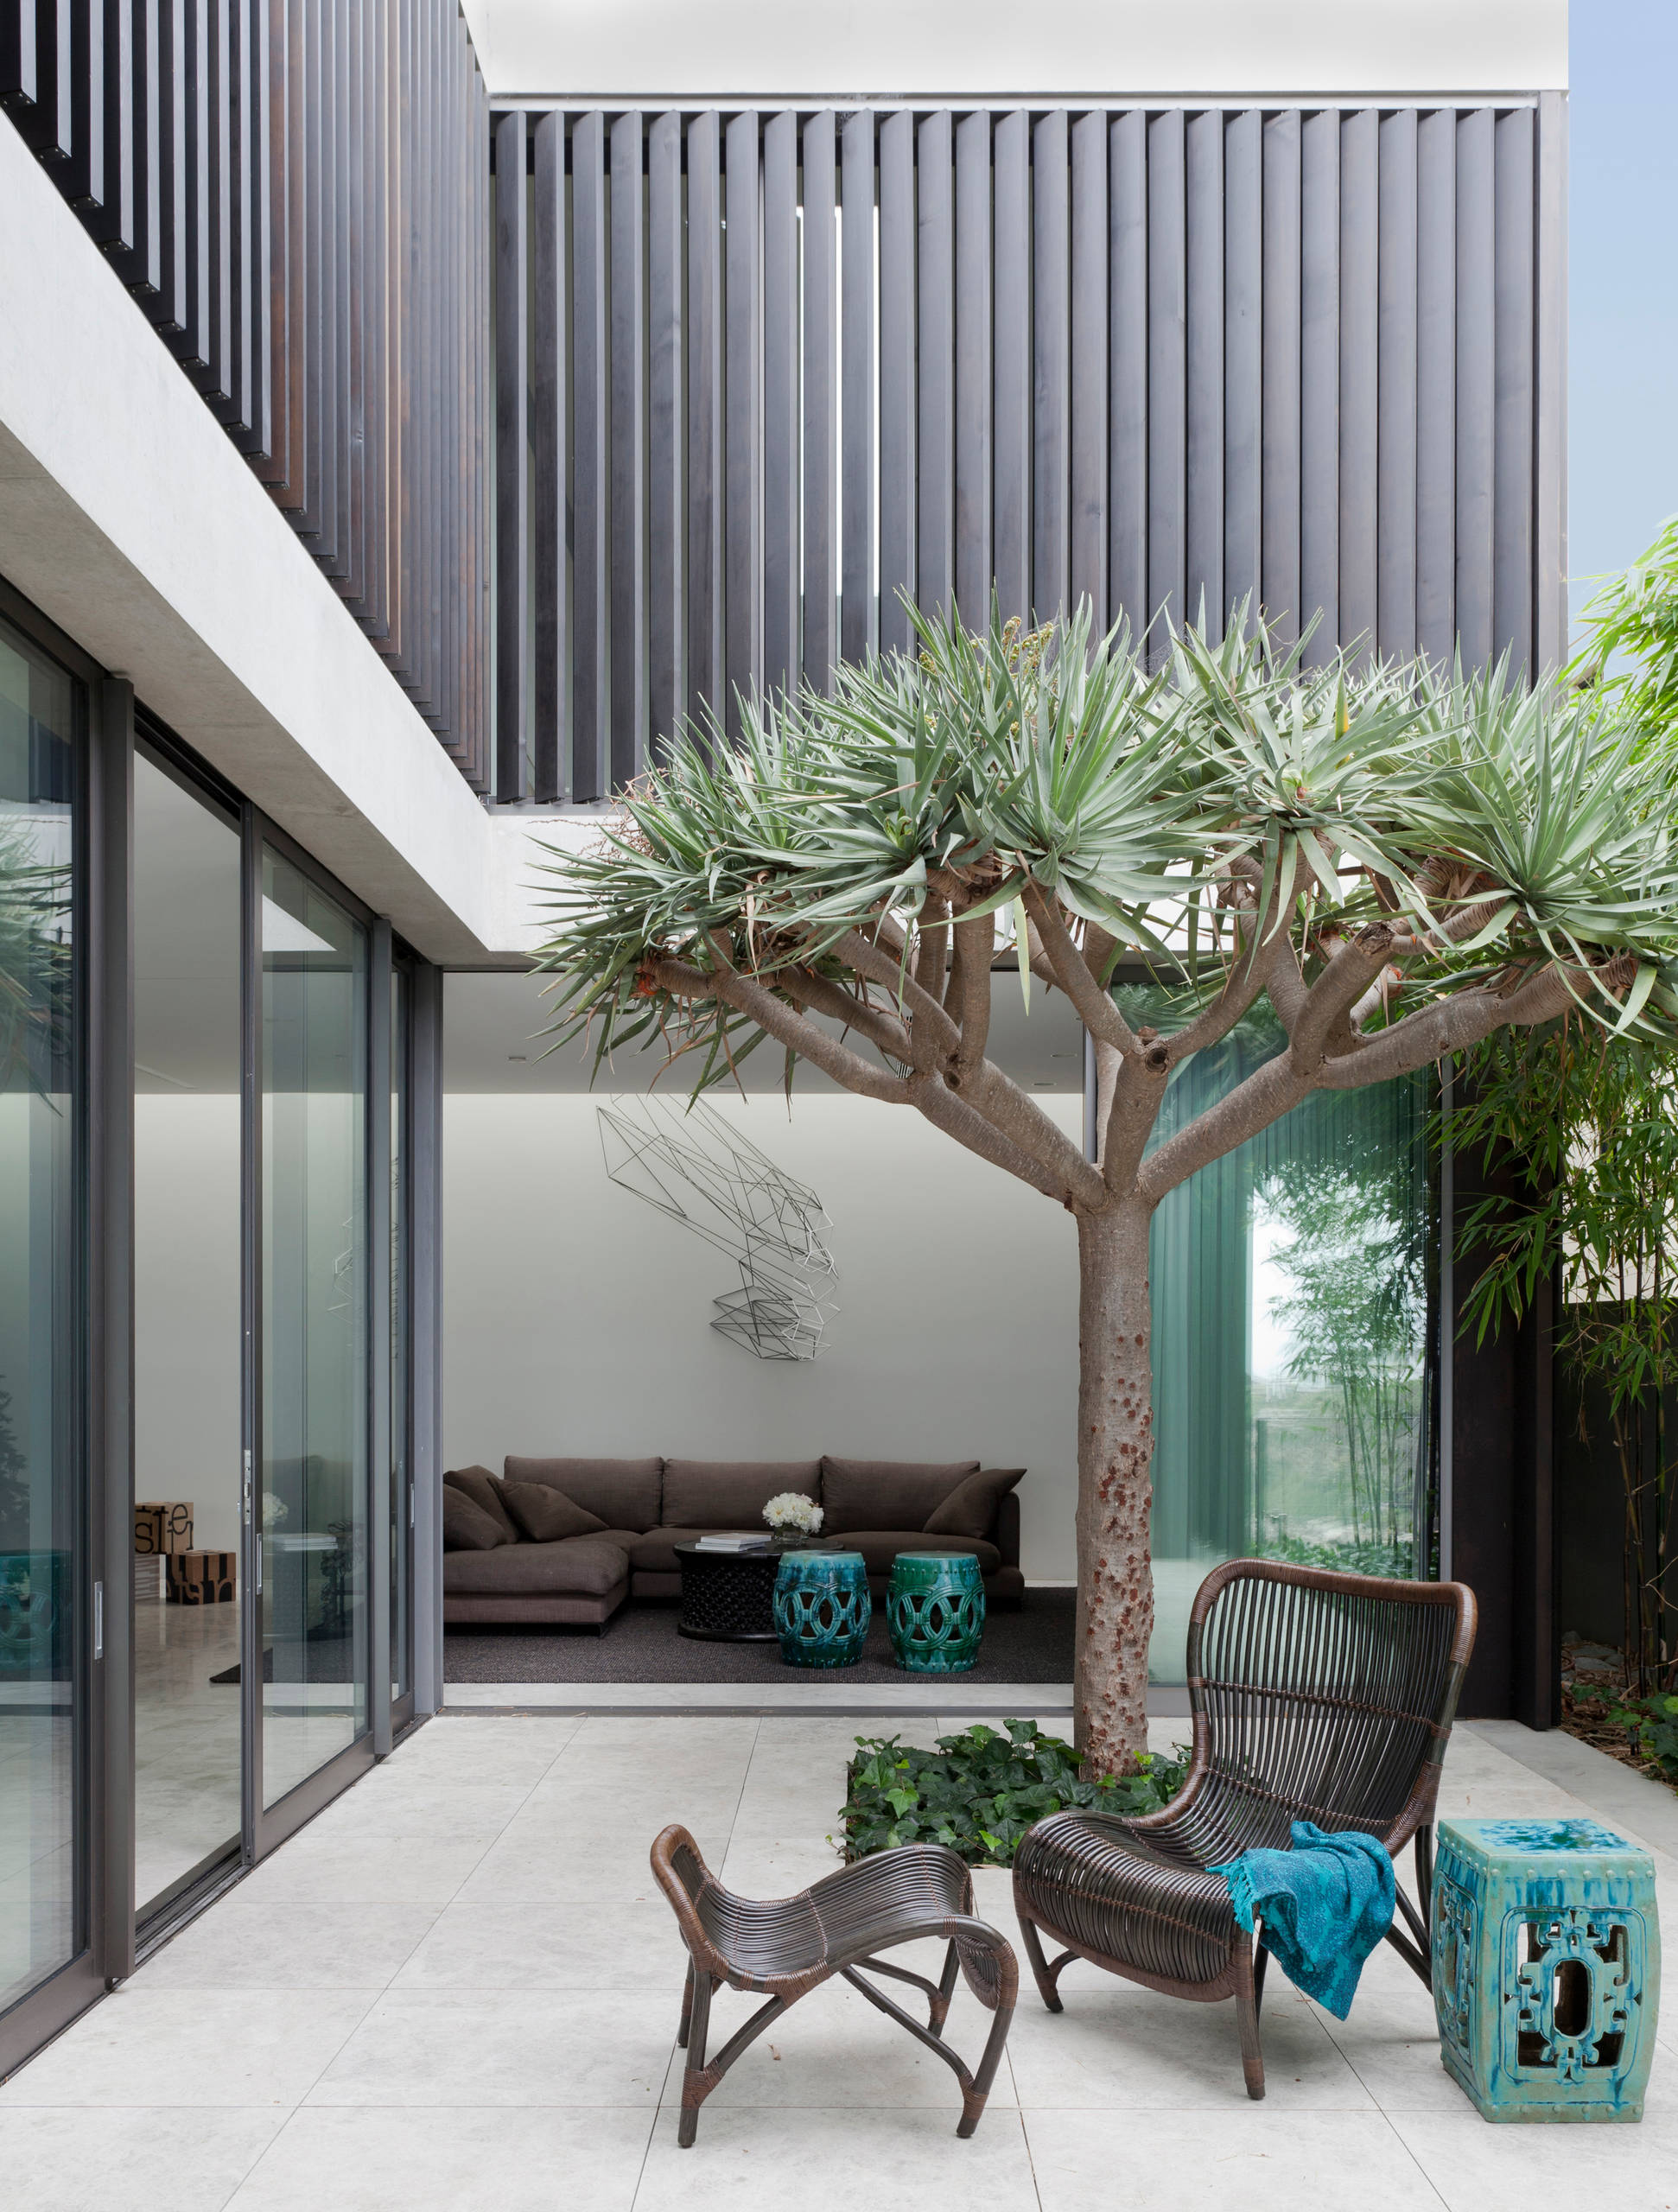 18 Spectacular Modern Patio Designs To Enjoy The Outdoors